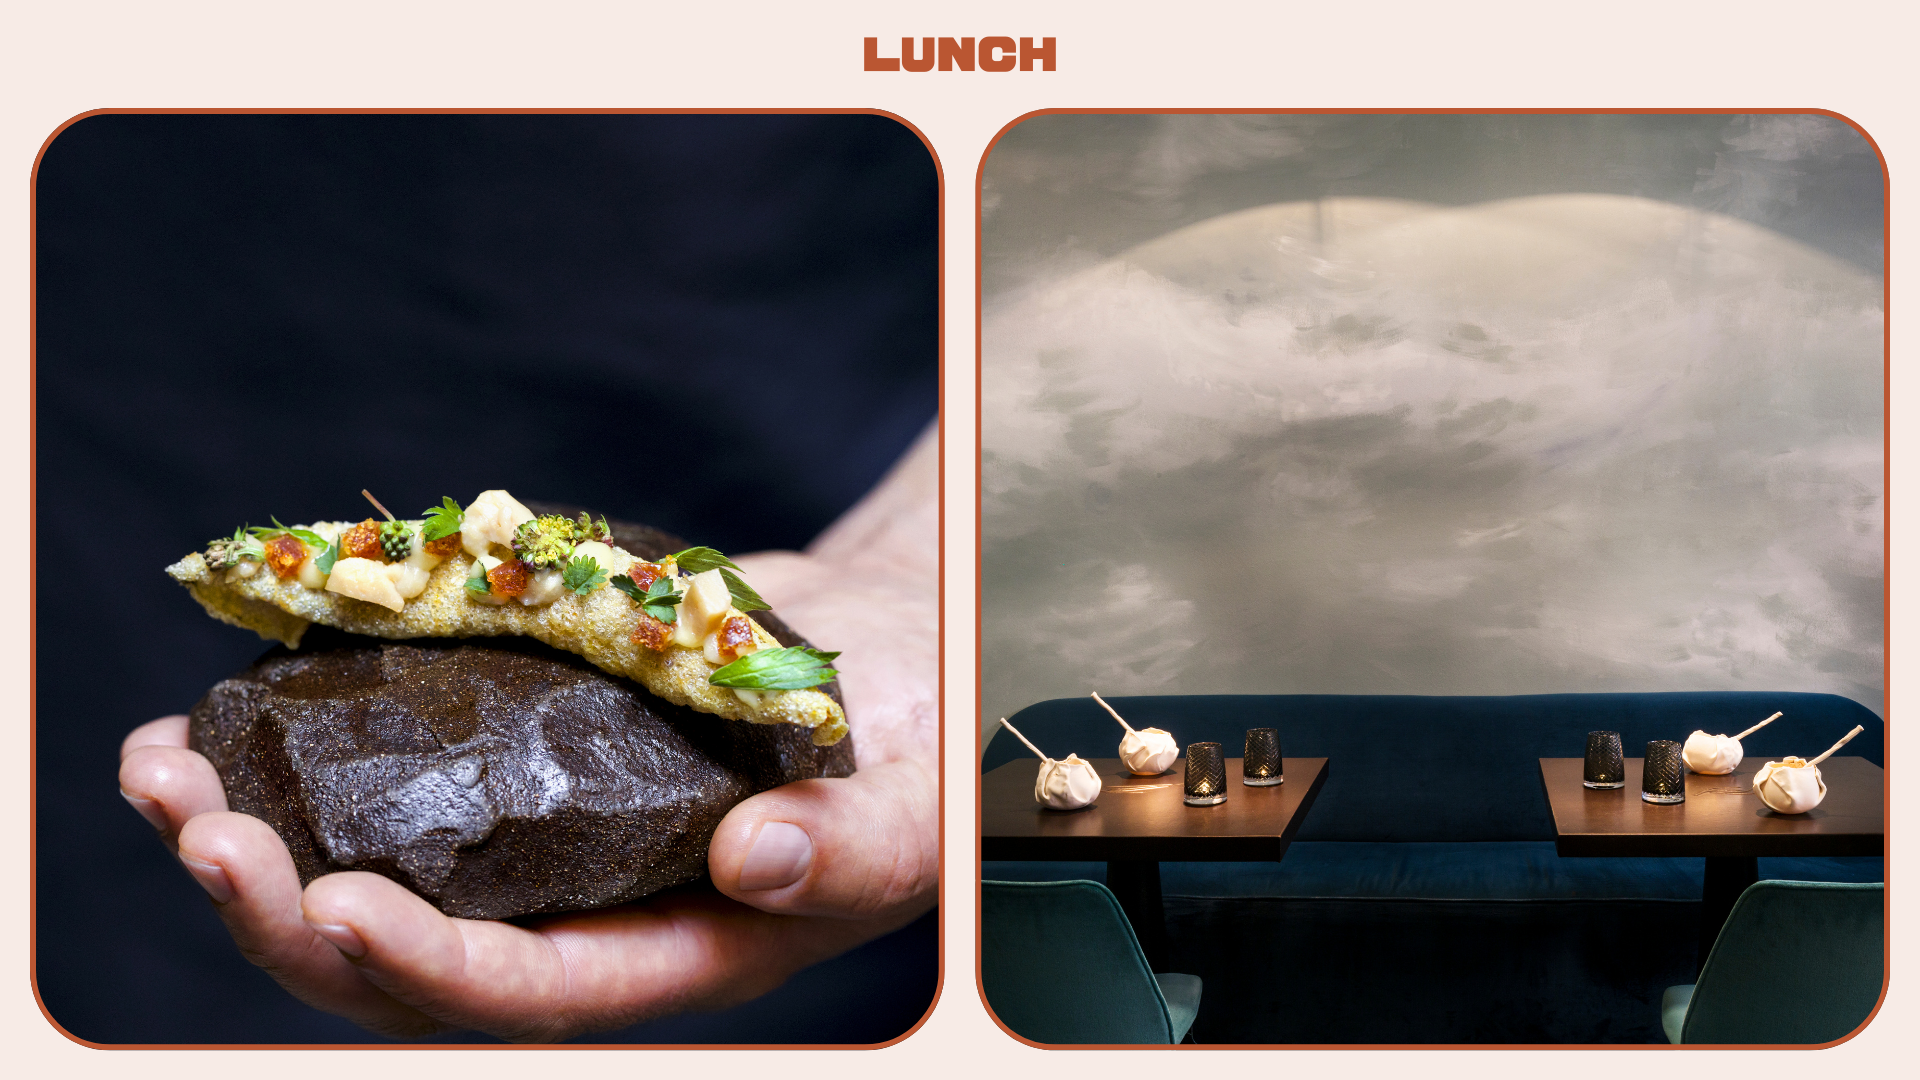 Haute-cuisine lunch at Jeremy Galvin 